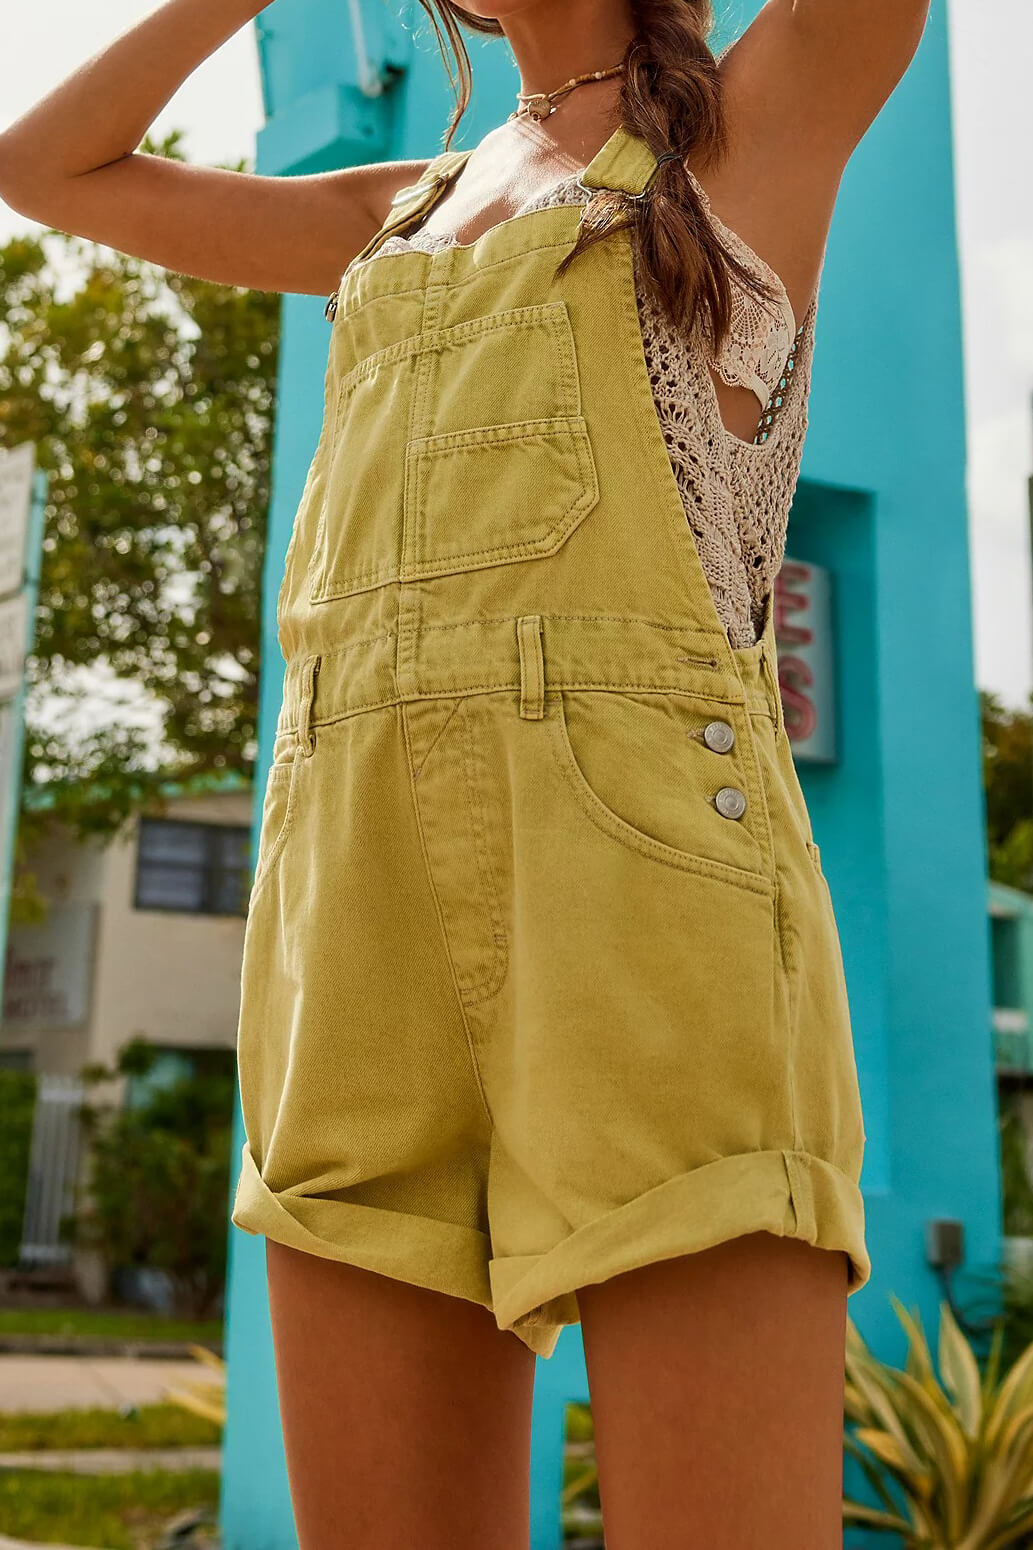 Free People ziggy shortalls in sunny lime